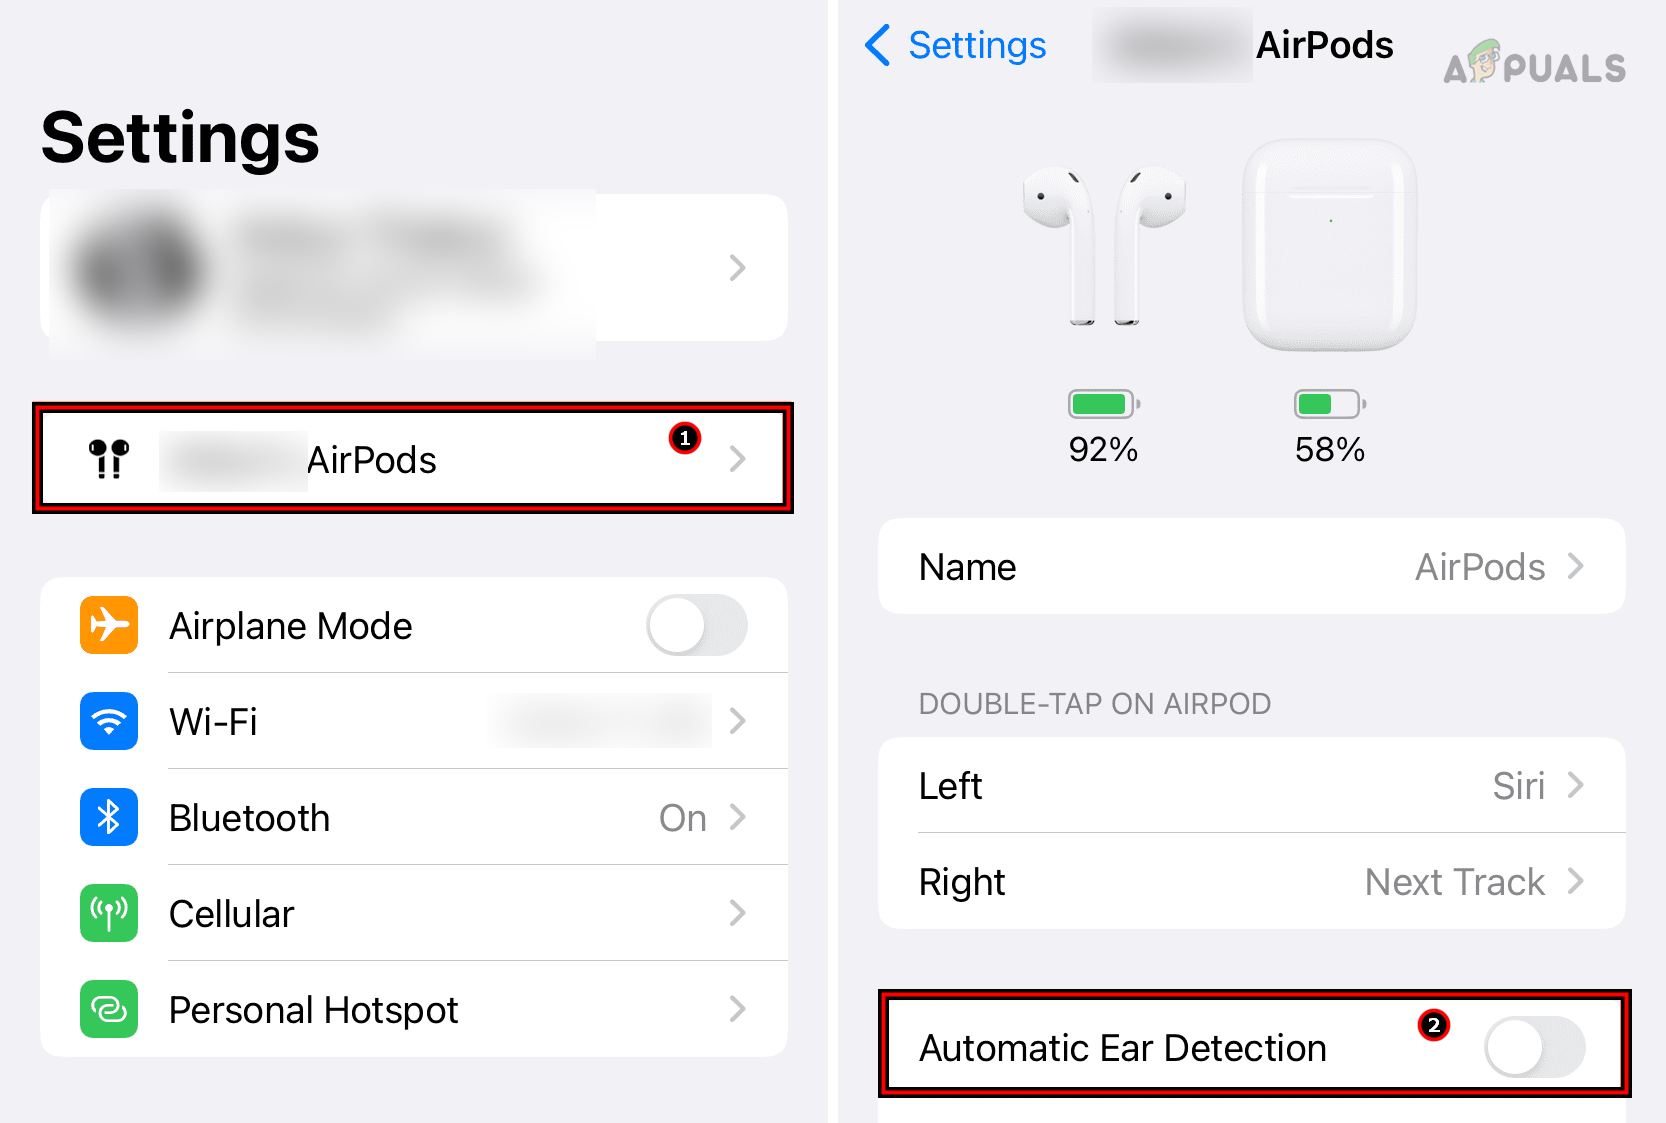 Disable Automatic Ear Detection of the AirPods Pro